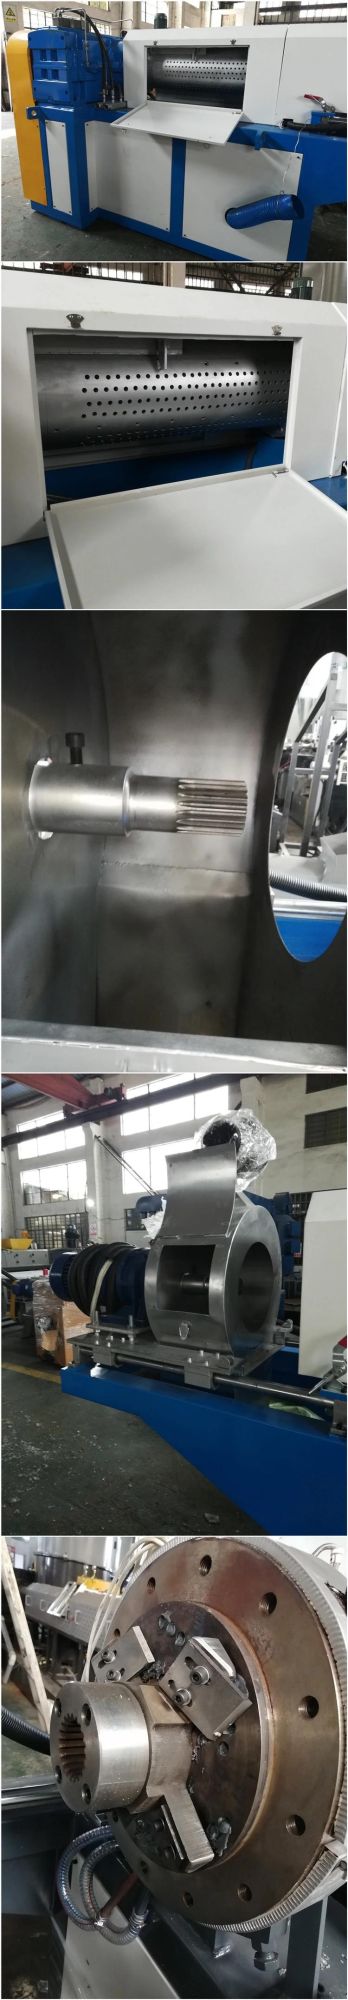 Hot Selling Plastic Squeezer Compactor Machine From China Factory